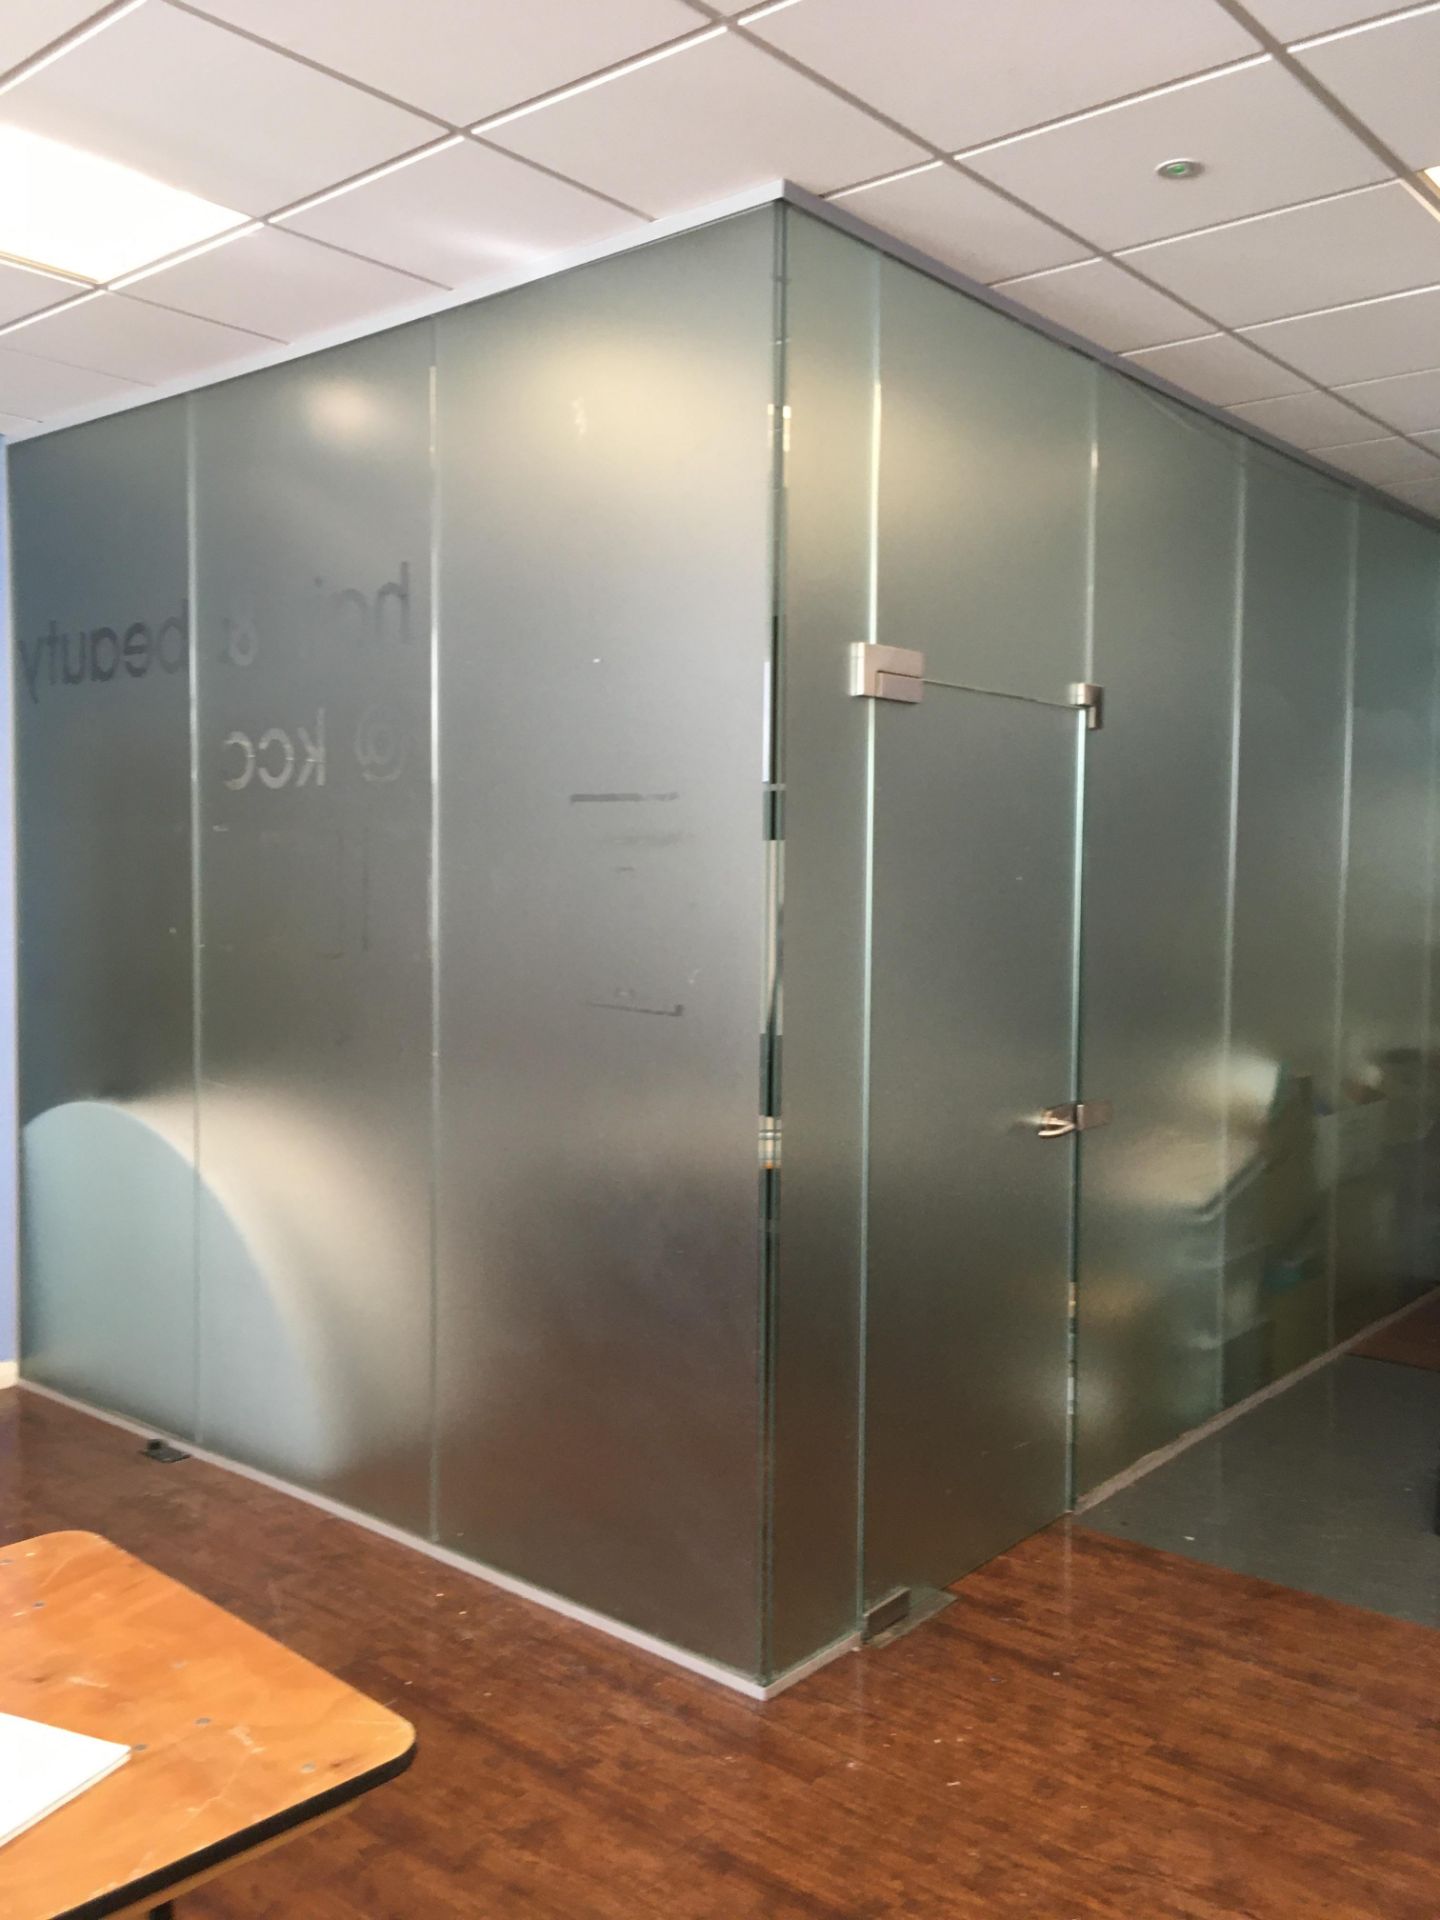 Toughend Glass 2 Sided Partition Wall with Single Door - Image 2 of 4